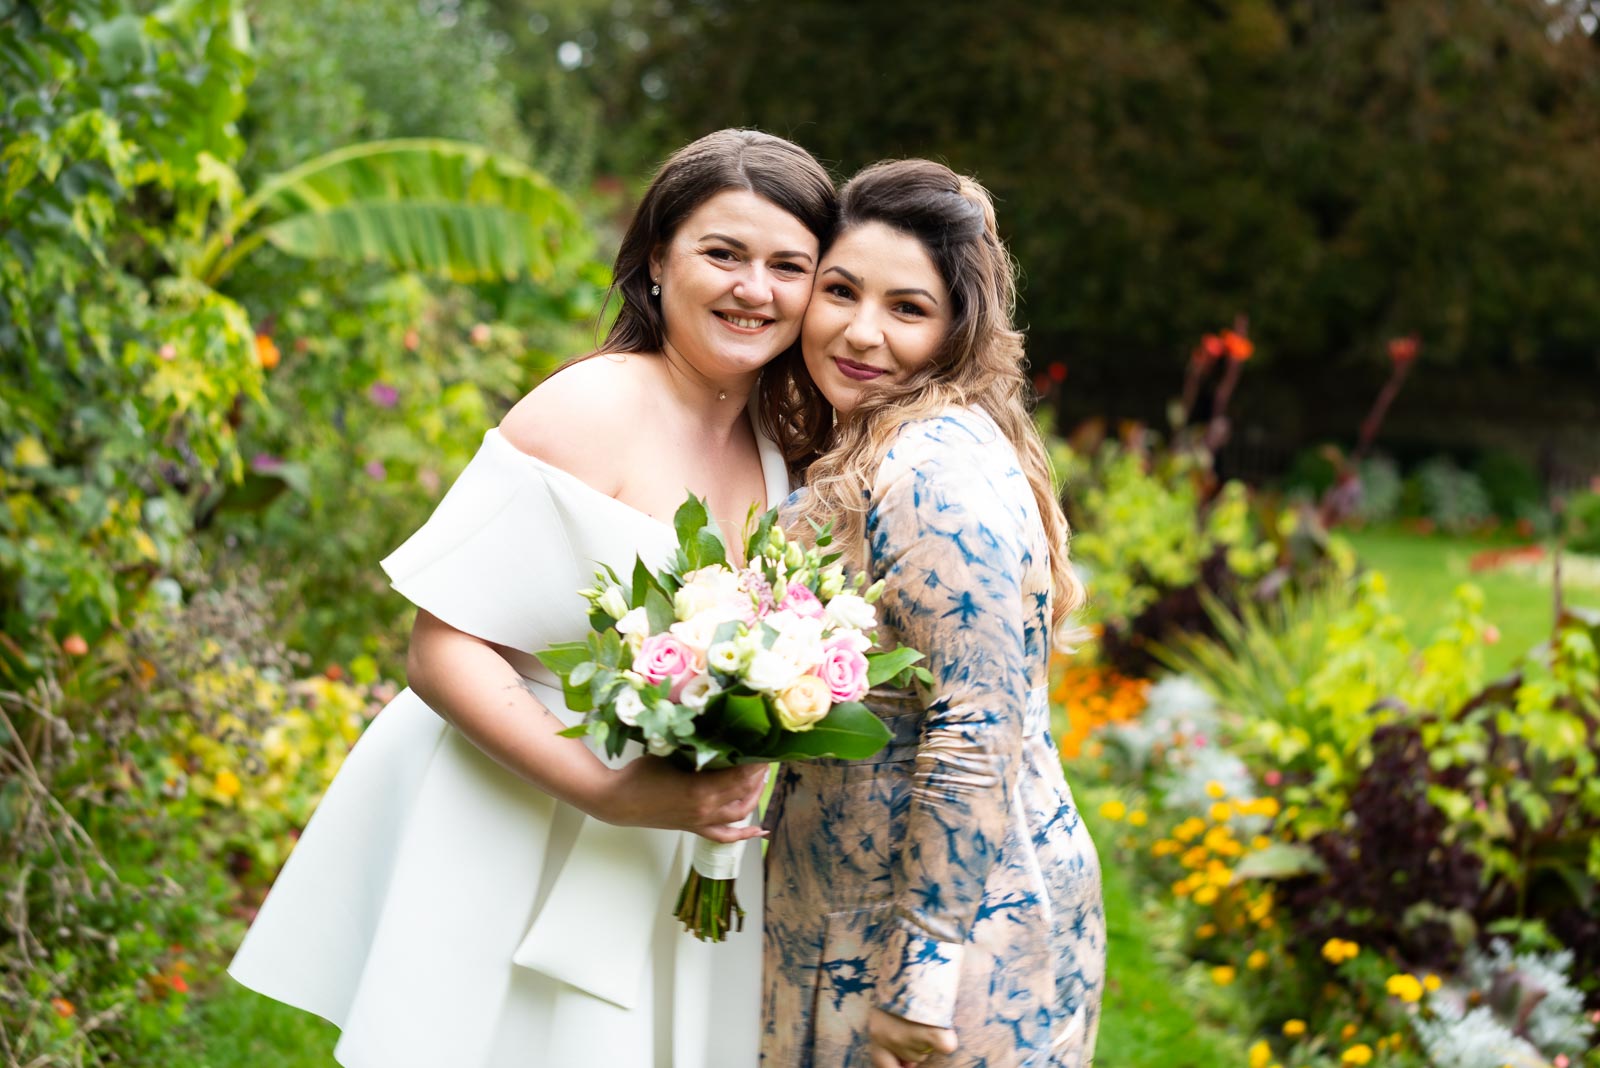 Maria poses with her maid of honour in Southover Grange, Lewes after her wedding to Robert.